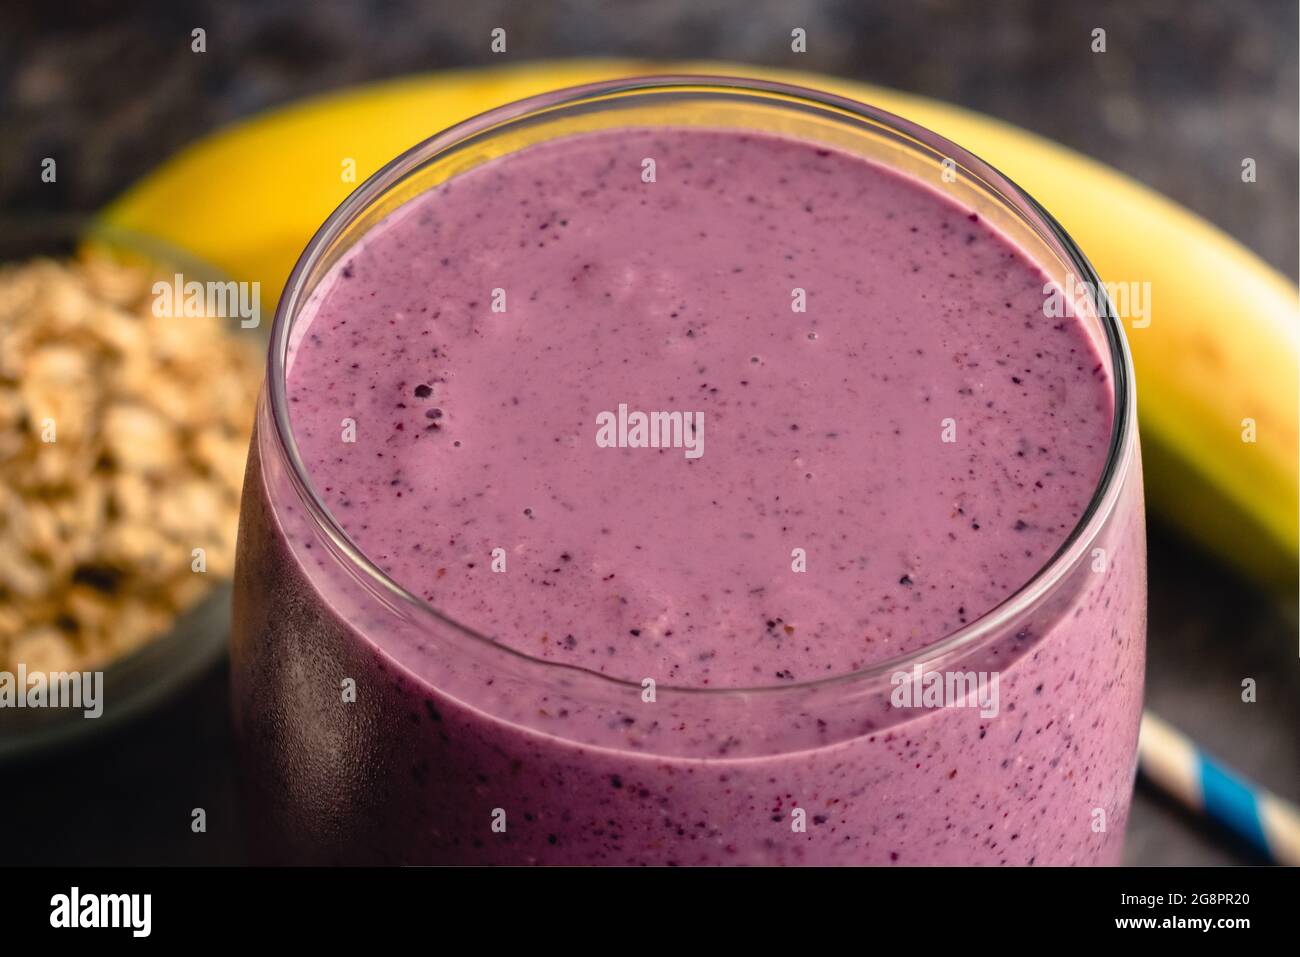 Healthy Blueberry Muffin Breakfast Smoothie: A smoothie made with blueberries, banana, rolled oats, and Greek yogurt Stock Photo